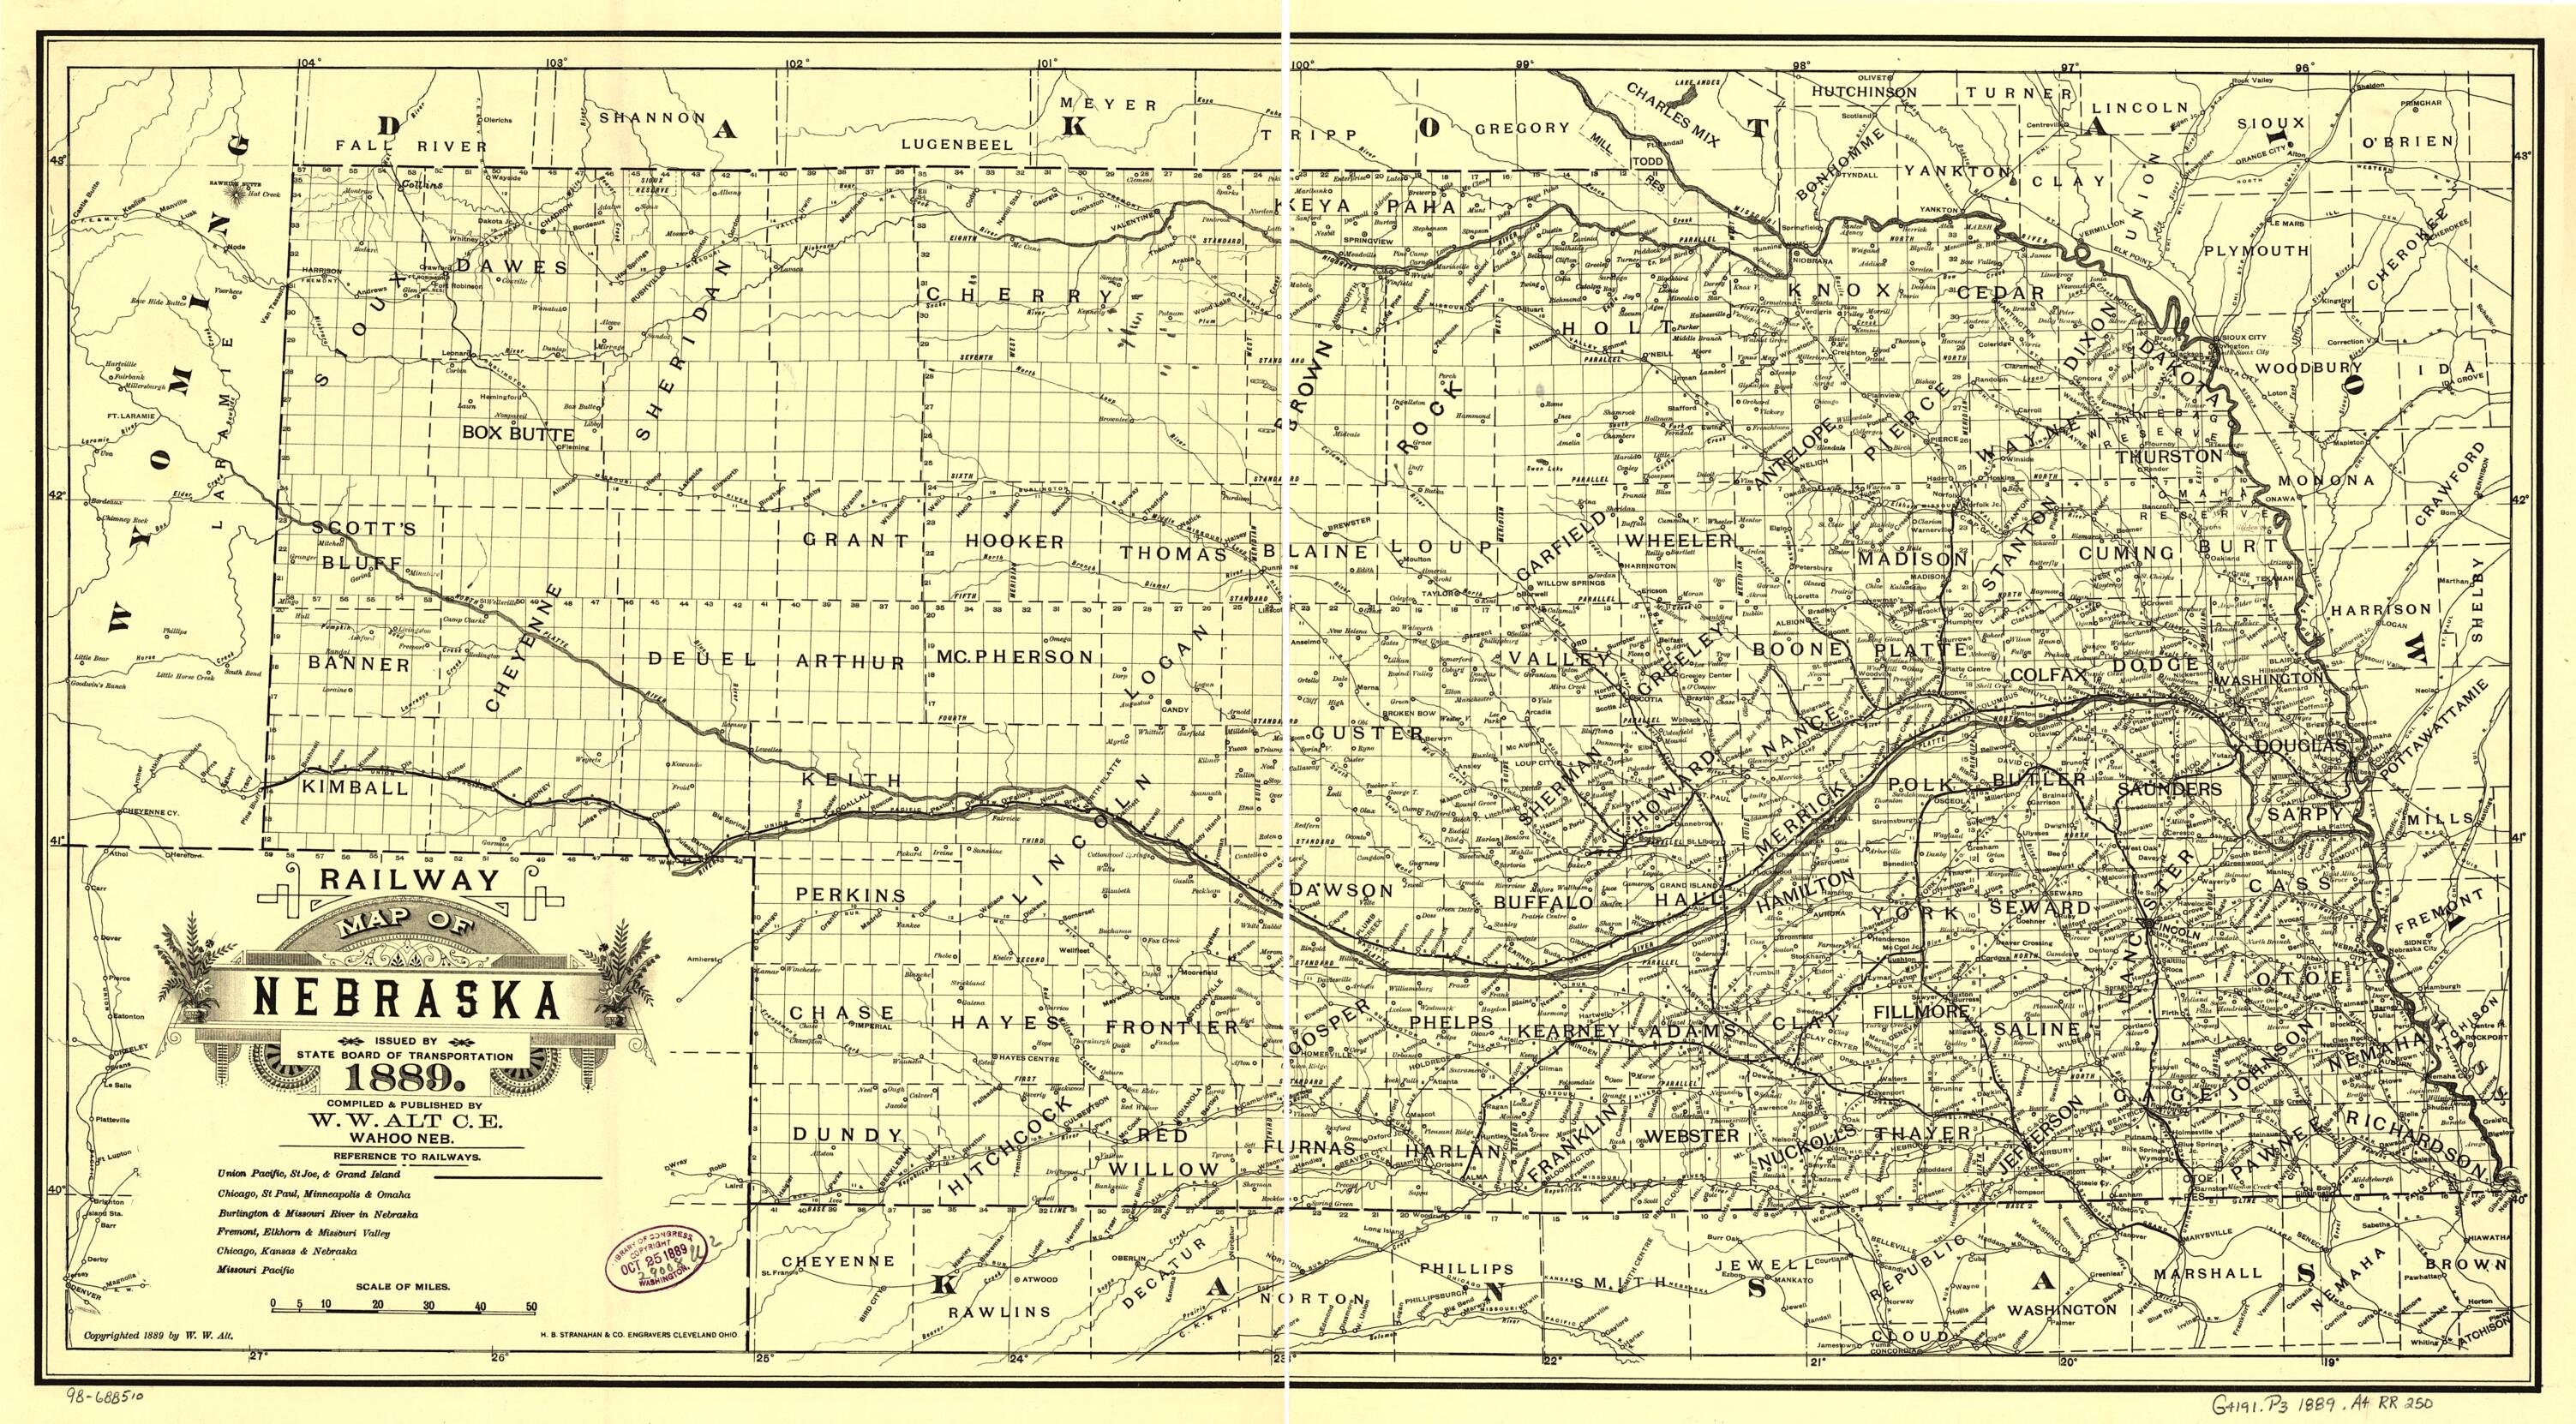 This old map of Railway Map of Nebraska Issued by State Board of Transportation from 1889 was created by W. W. Alt in 1889